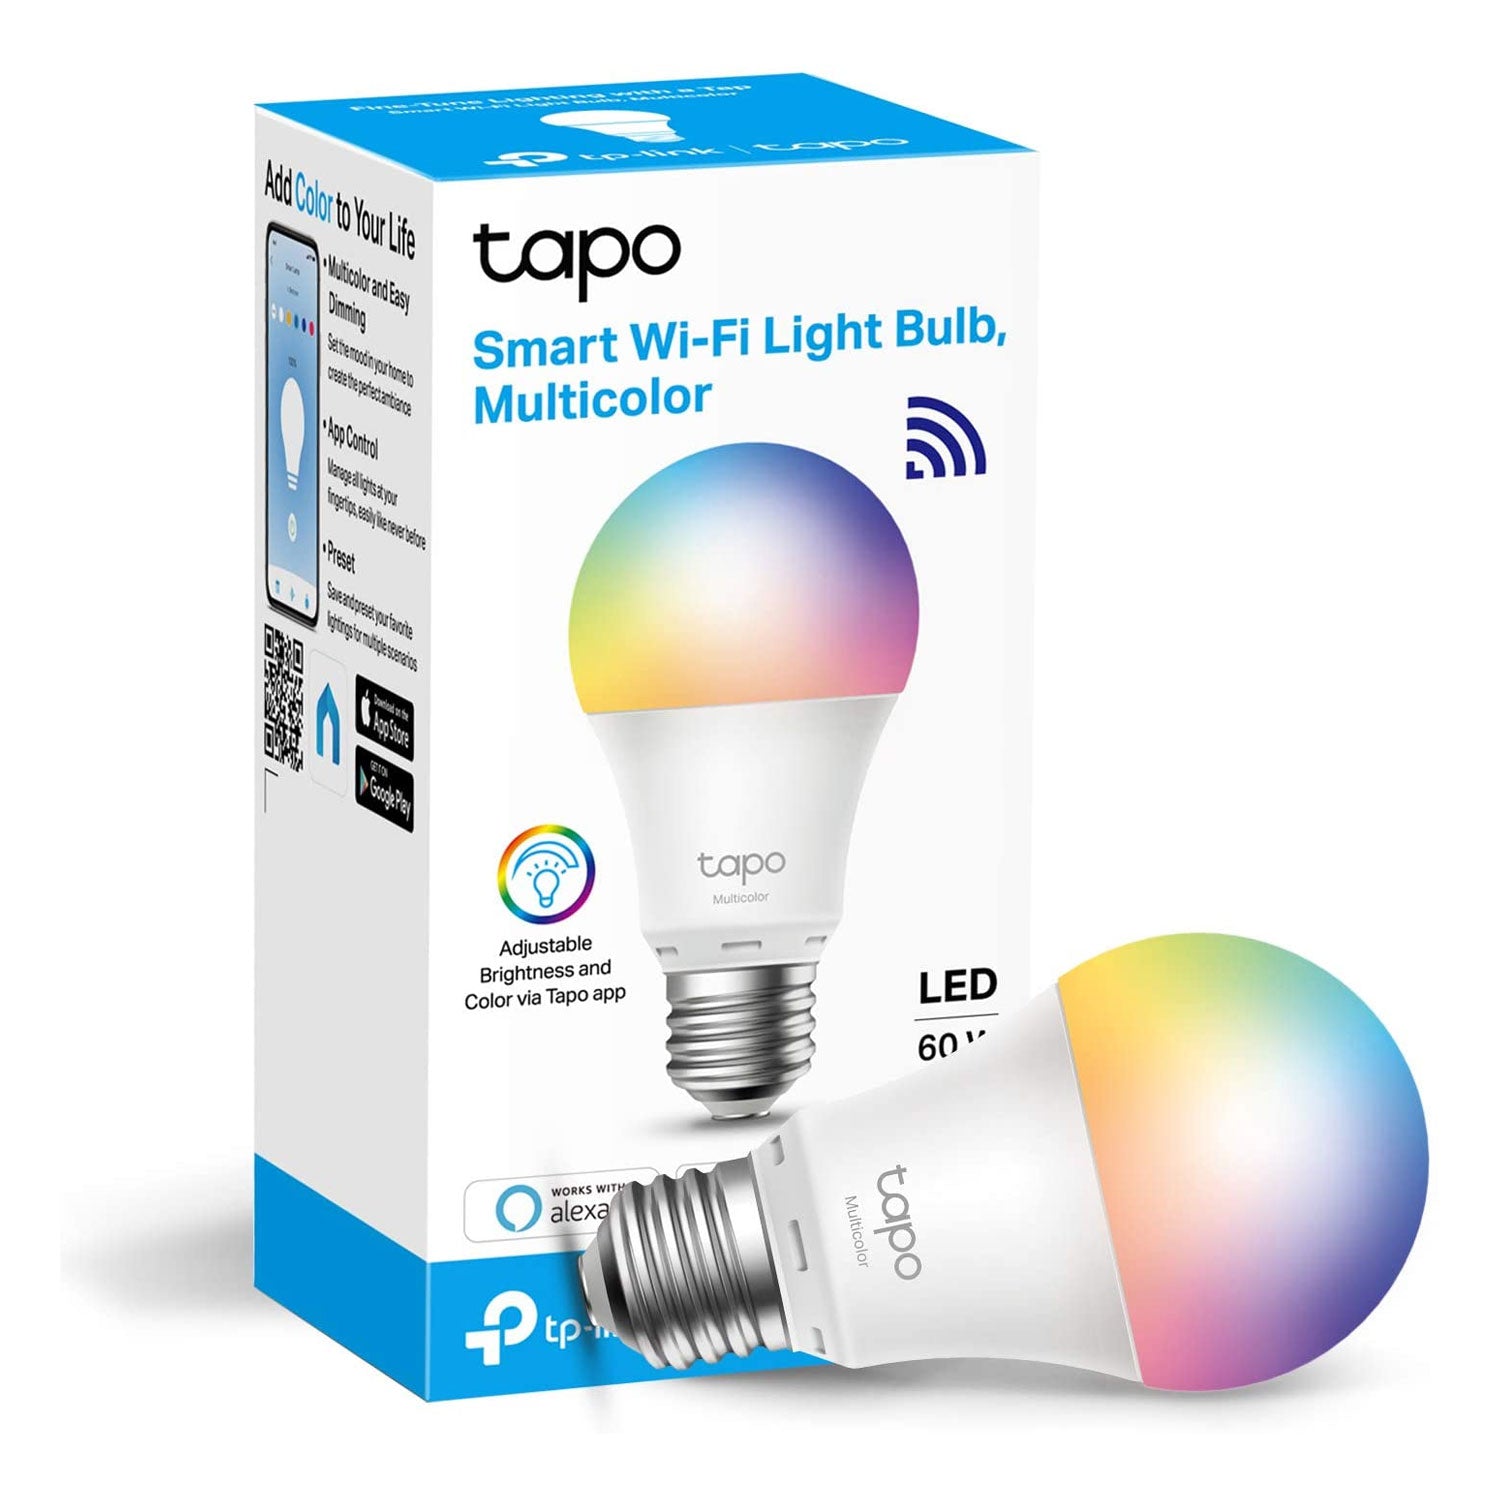 a tp link tapo L530E smart light bulb and its packaging